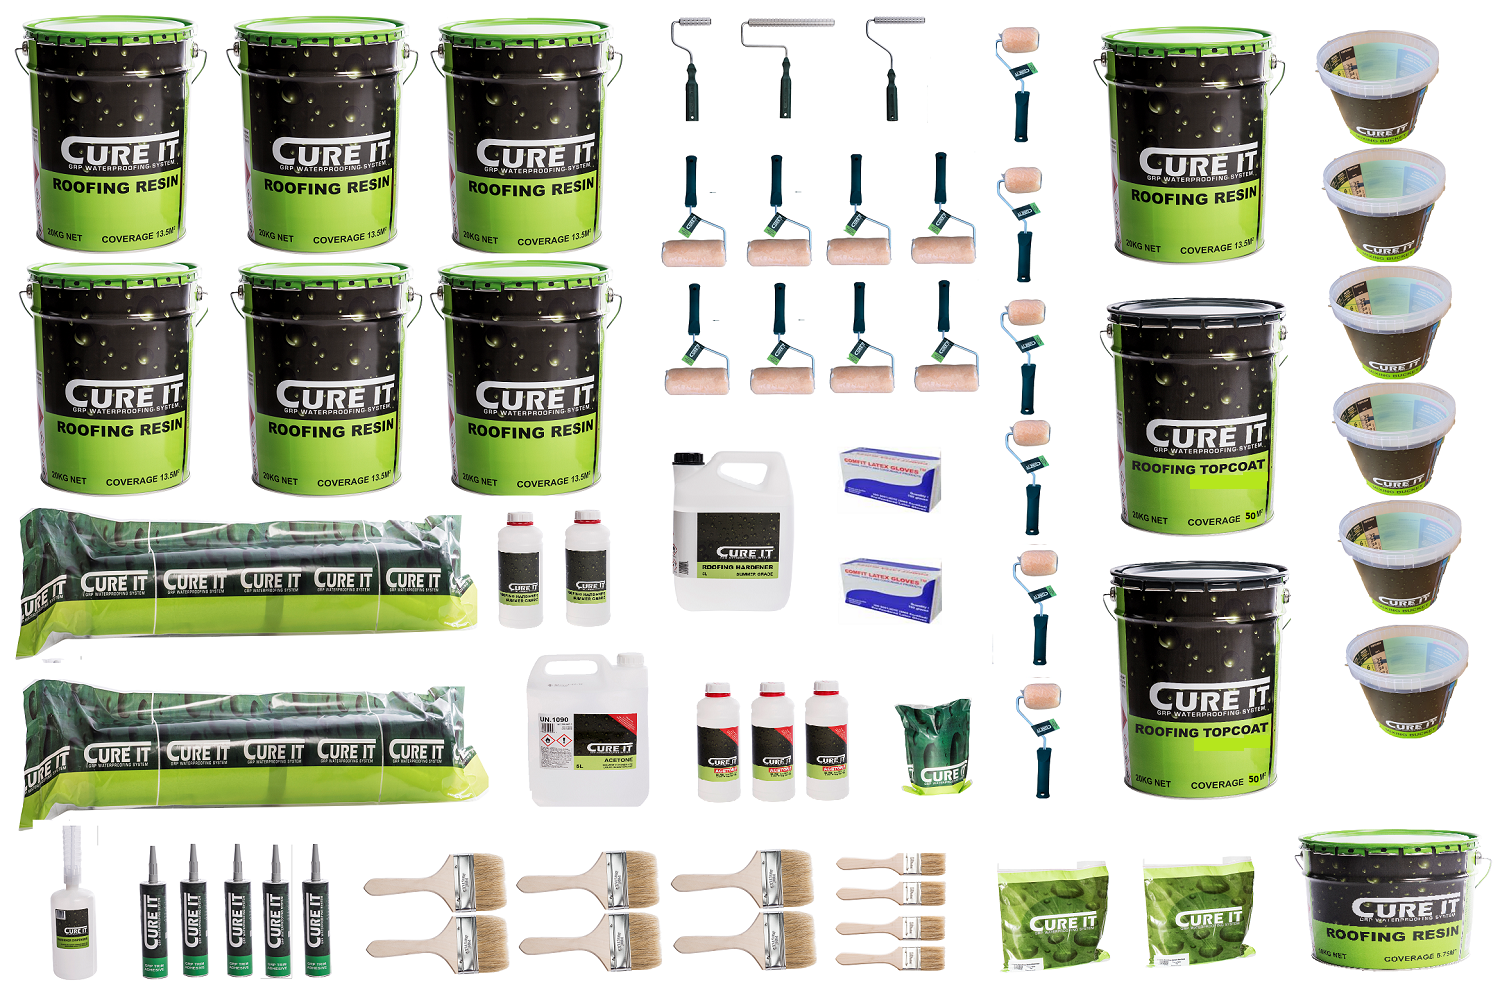 70m² Cure It 600g GRP Fibreglass Roofing Kit (Anthracite Grey)